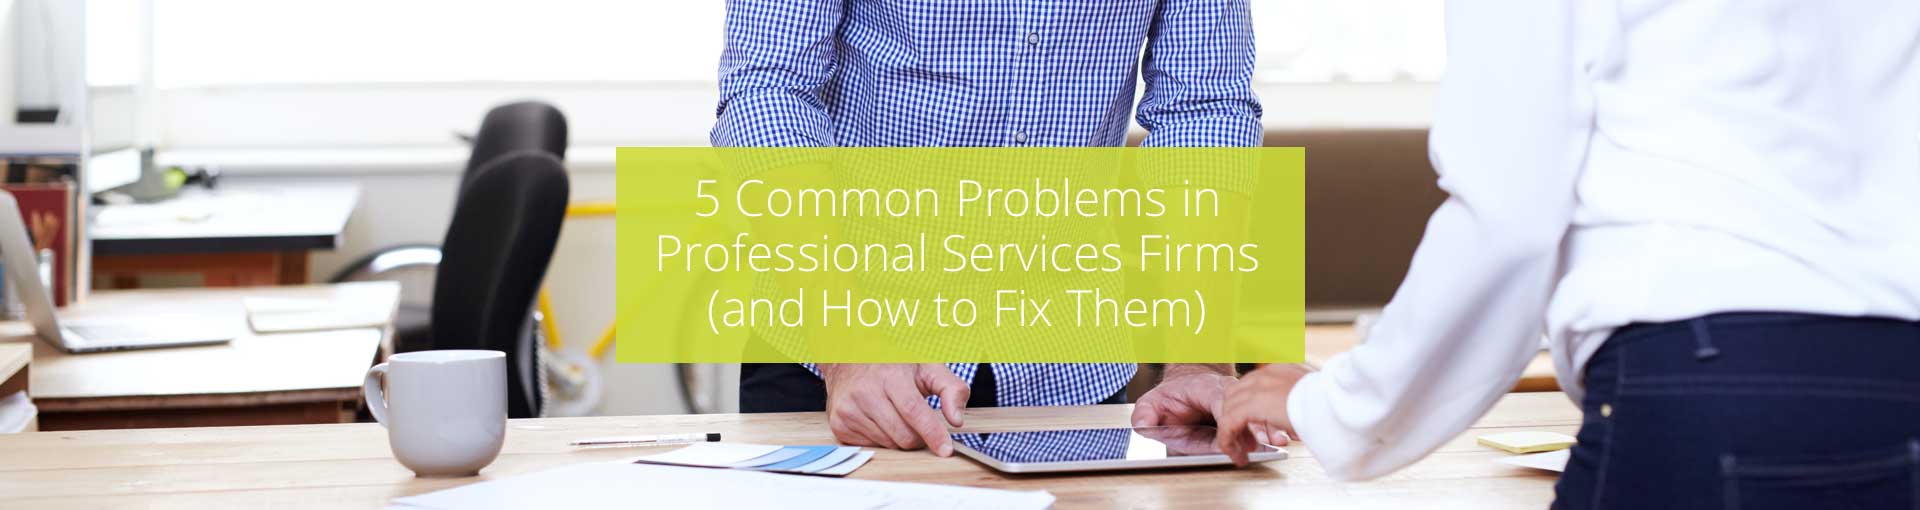 5 Common Problems in Professional Services Firms (and How to Fix Them)